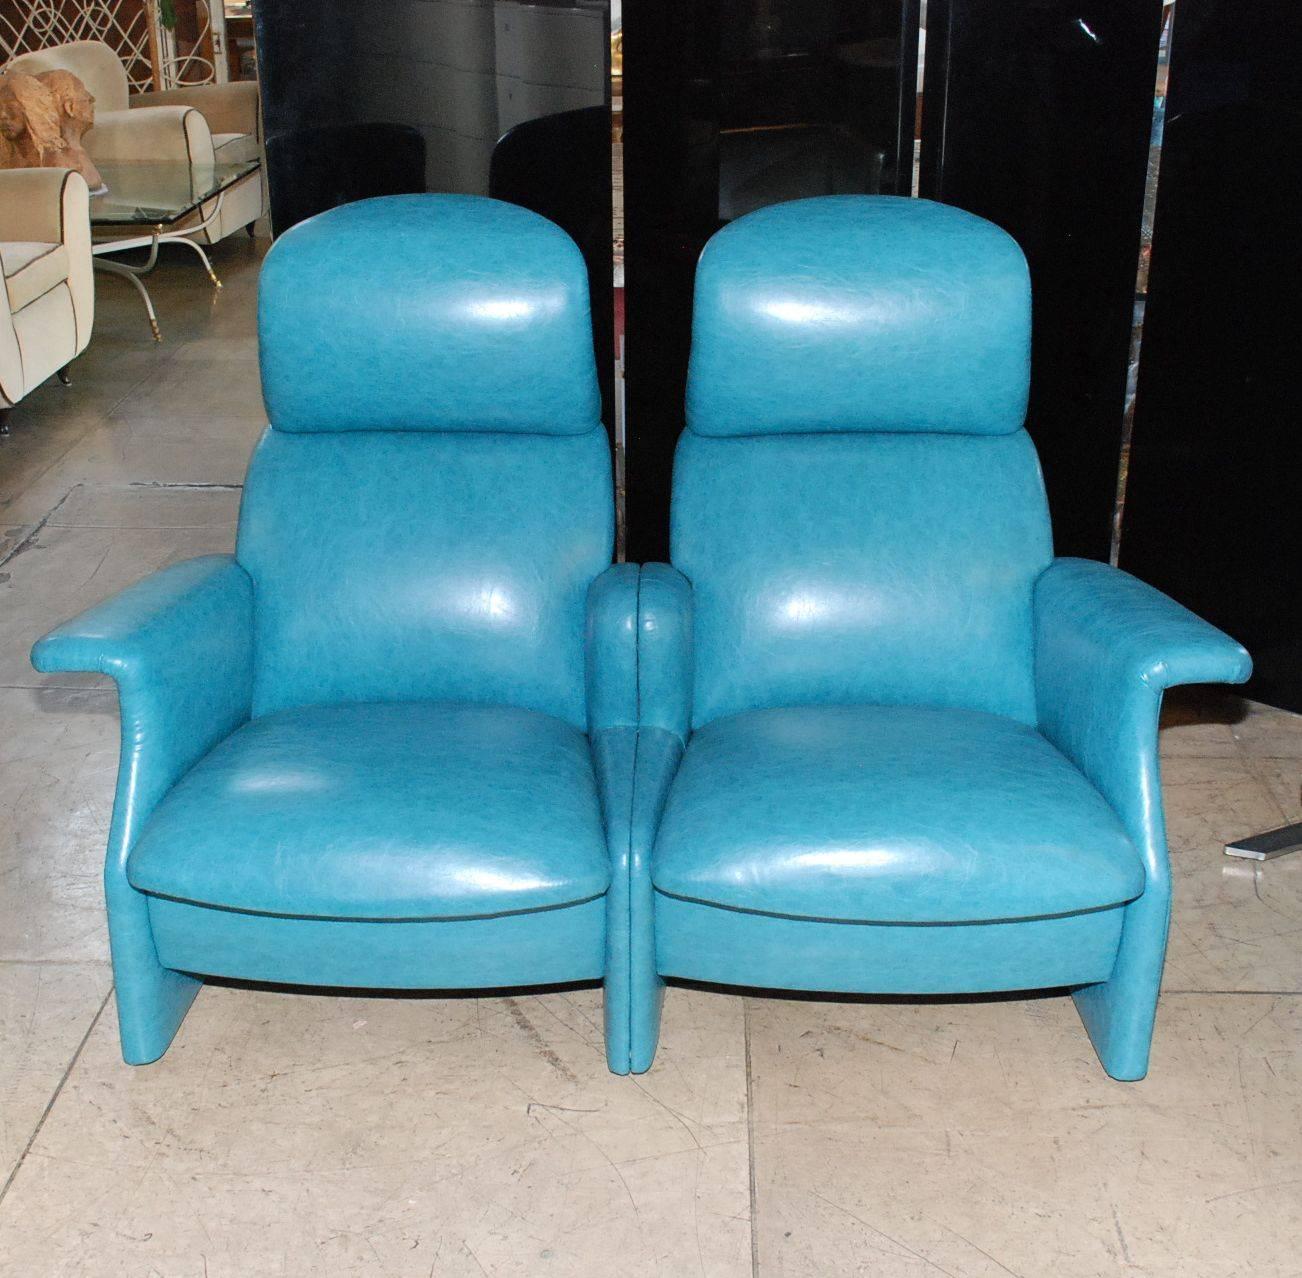 Double San Luca lounge chair newly upholstered with recycled leather by Achille and Pier Giacomo Castiglioni.